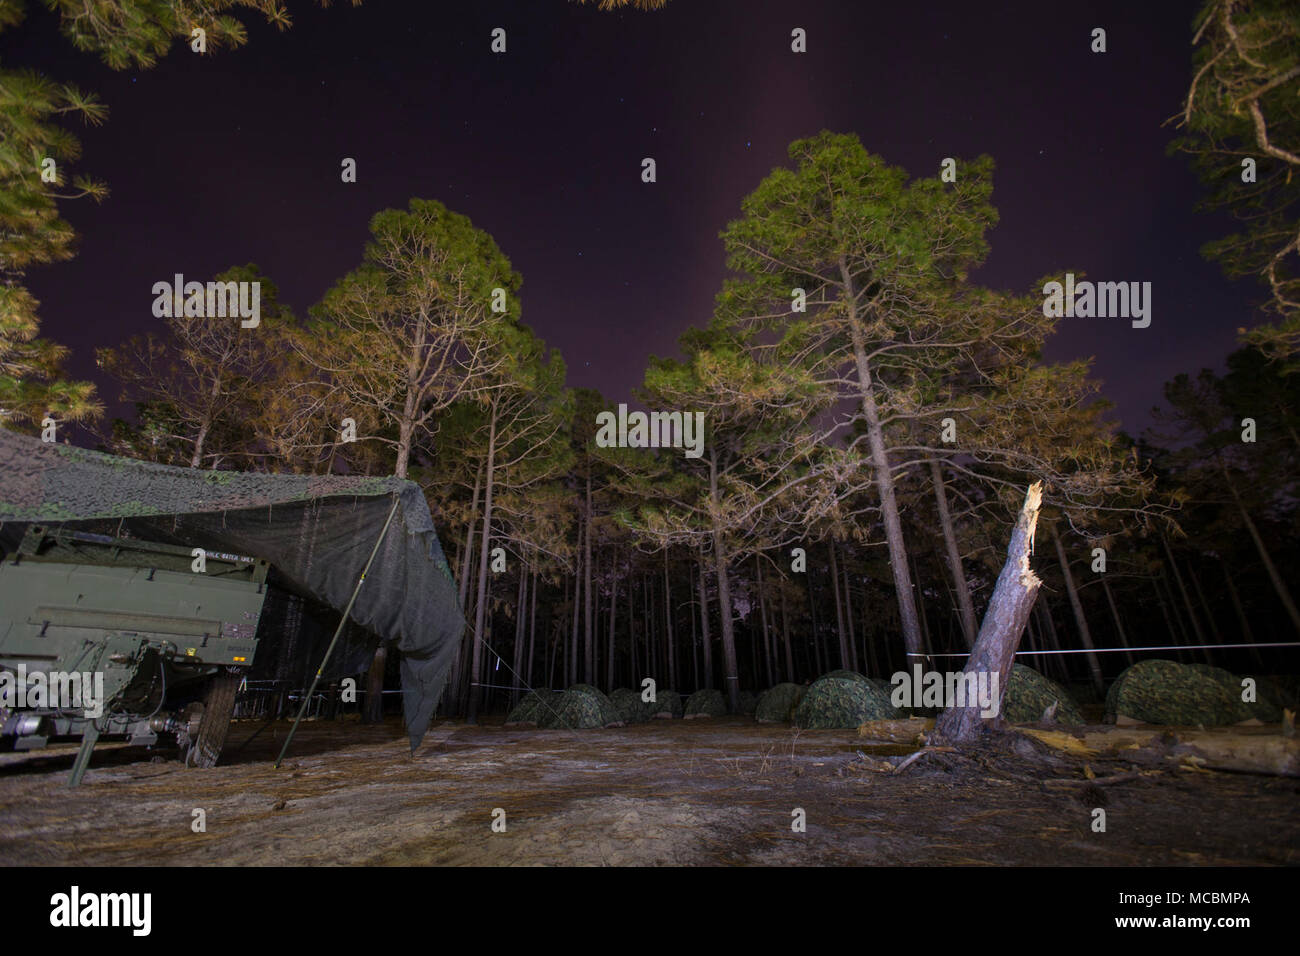 Two-man tents are staged at the edge of a tree line on Fort Bragg, N.C., March 23, 2018. The tents were placed to provide shelter to the Marines of 2nd Transportation Support Battalion, 2nd Marine Logistics Group, during Bold Bronco 18 which was an annual battalion sized training exercise held to promote force readiness. Stock Photo